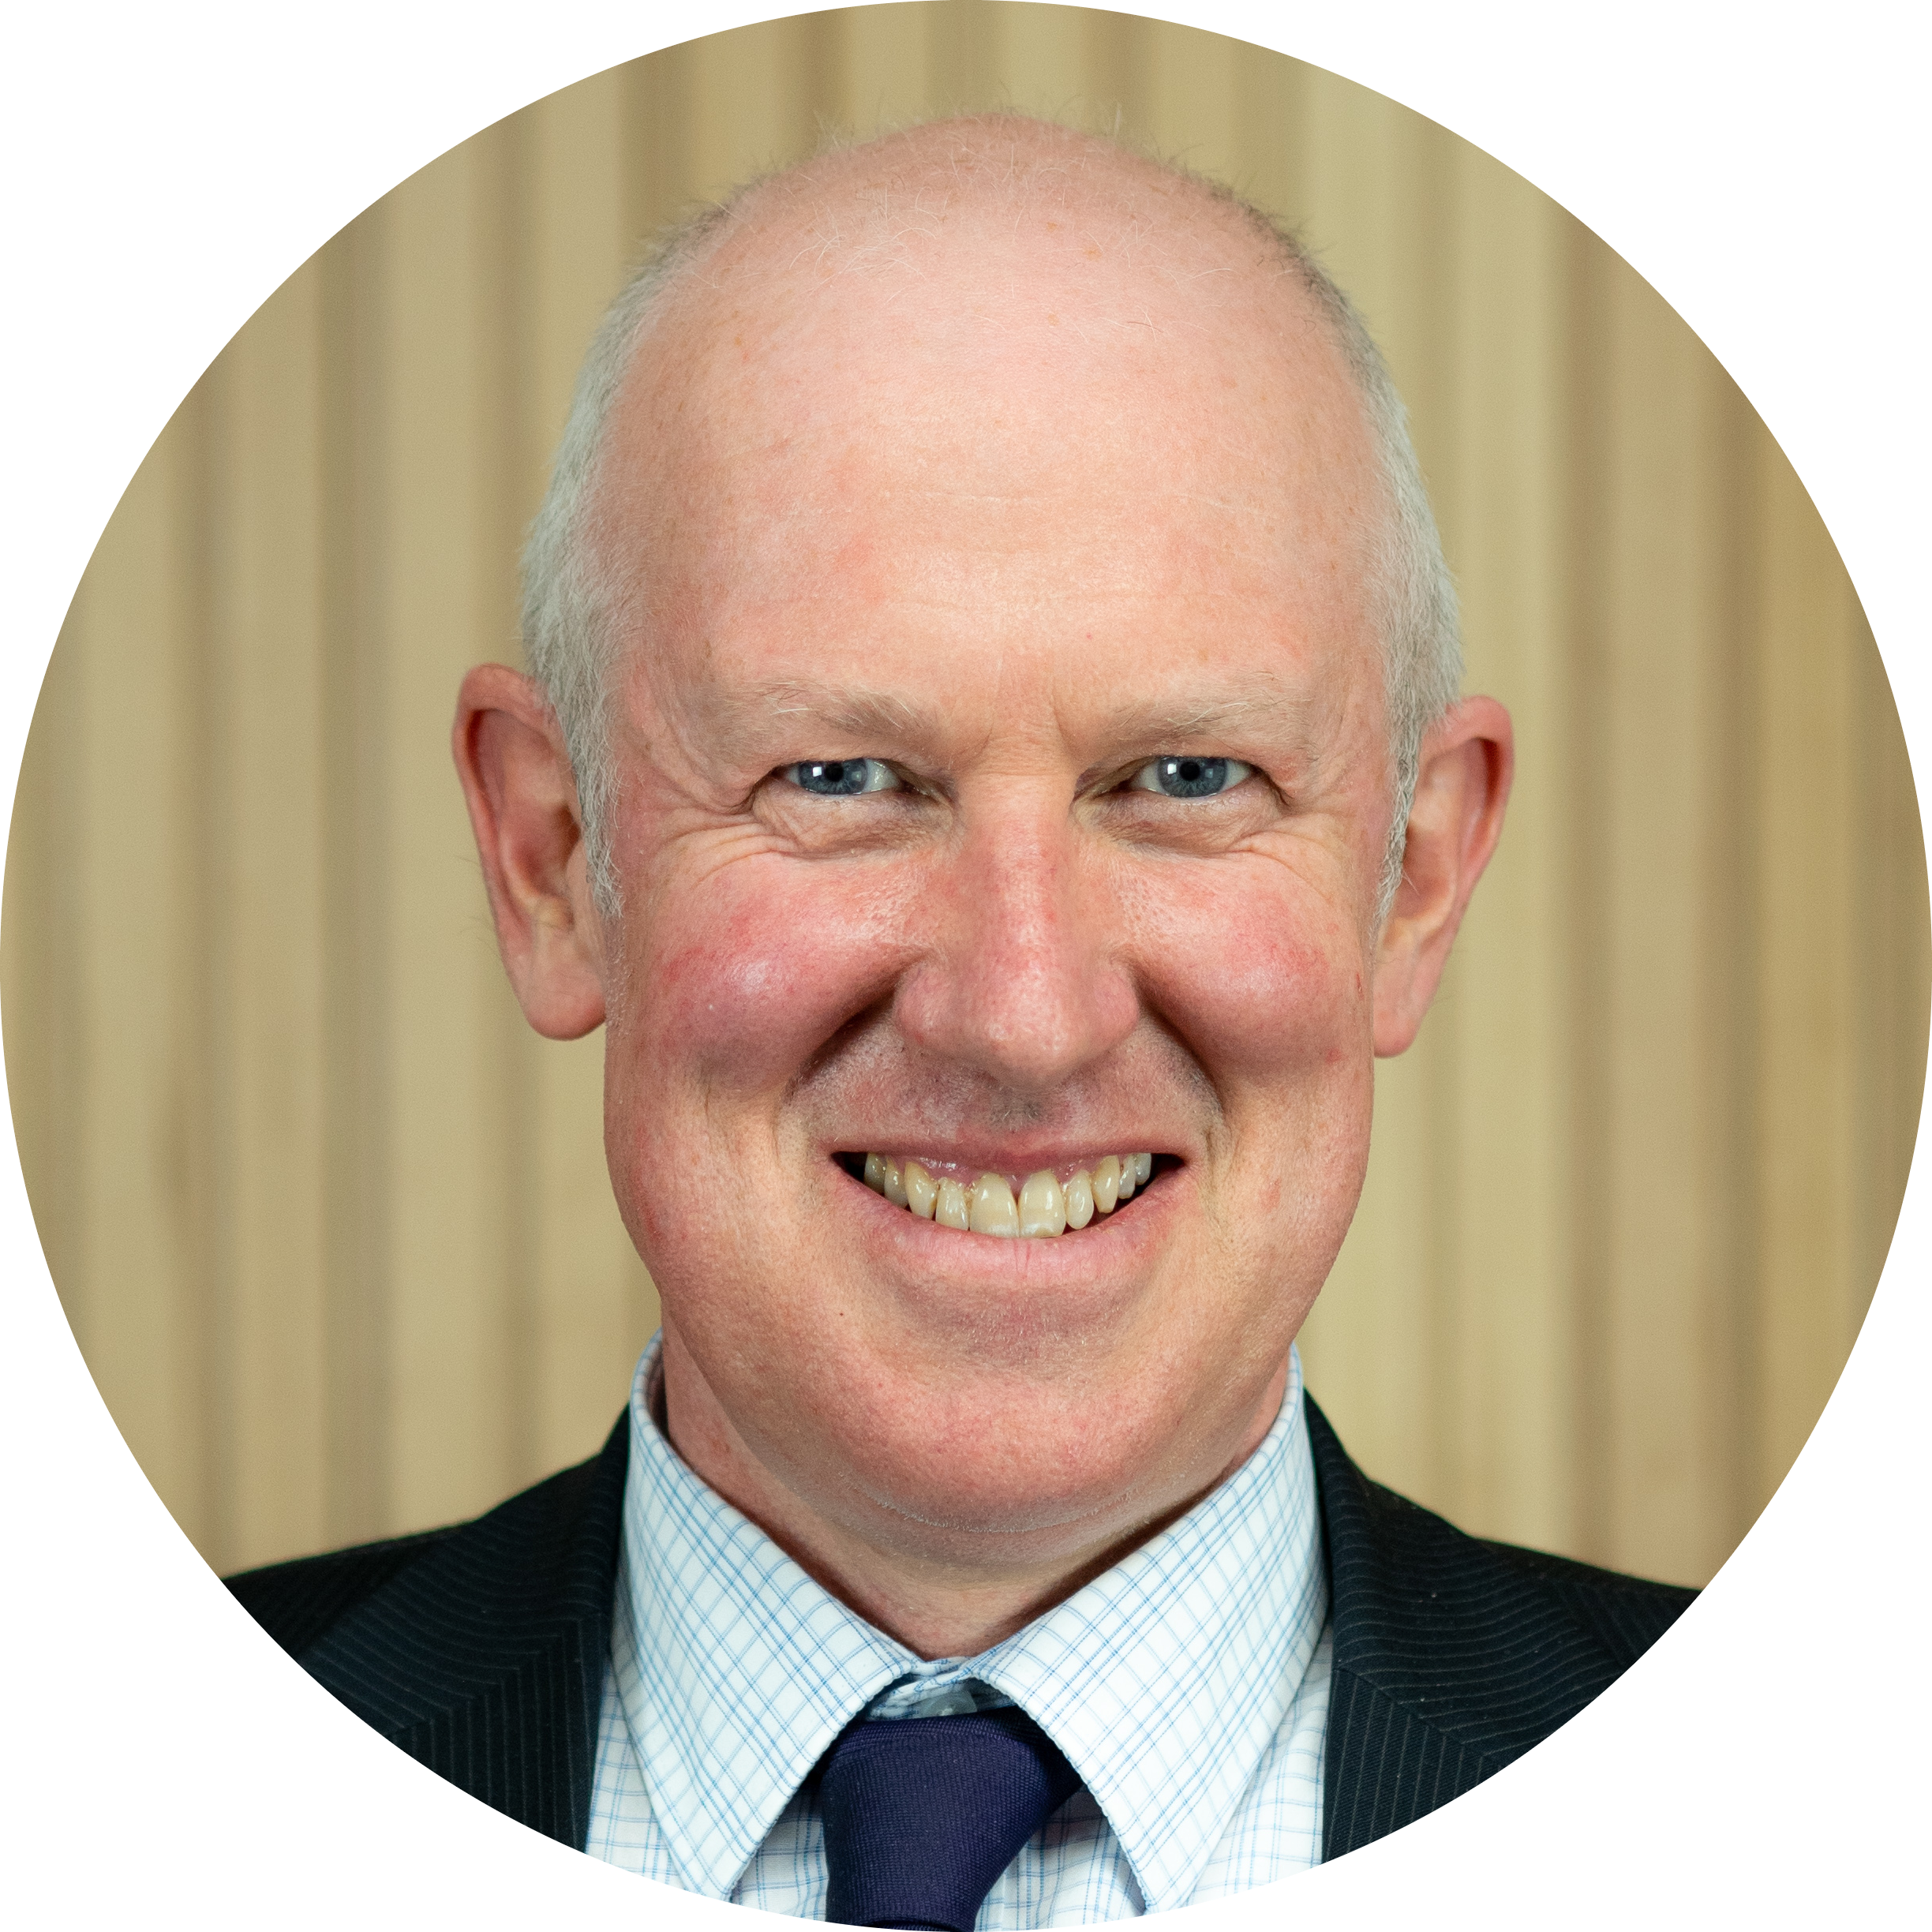 ACFID CEO Marc Purcell's headshot, in a circular format